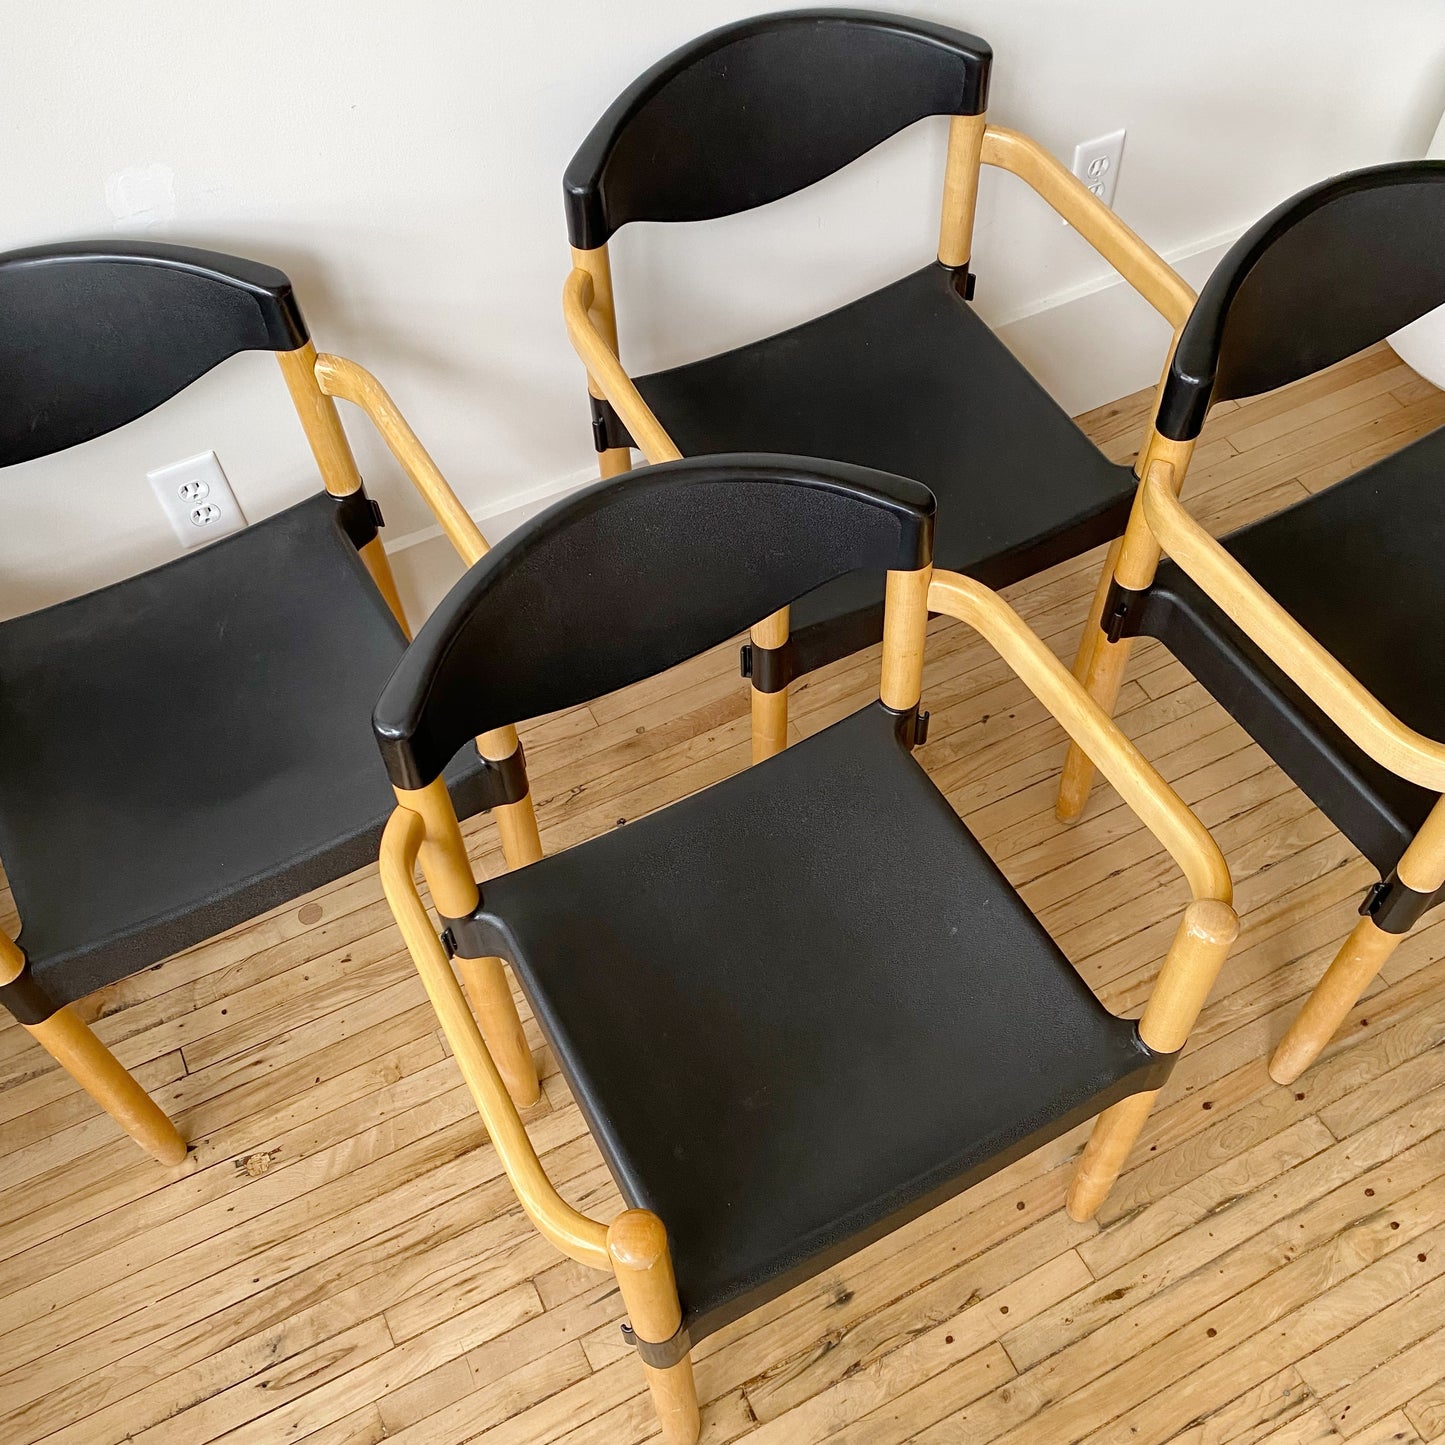 Set of 4 Vintage “Strax” Chairs by Hartmut Lohmeyer for Casala